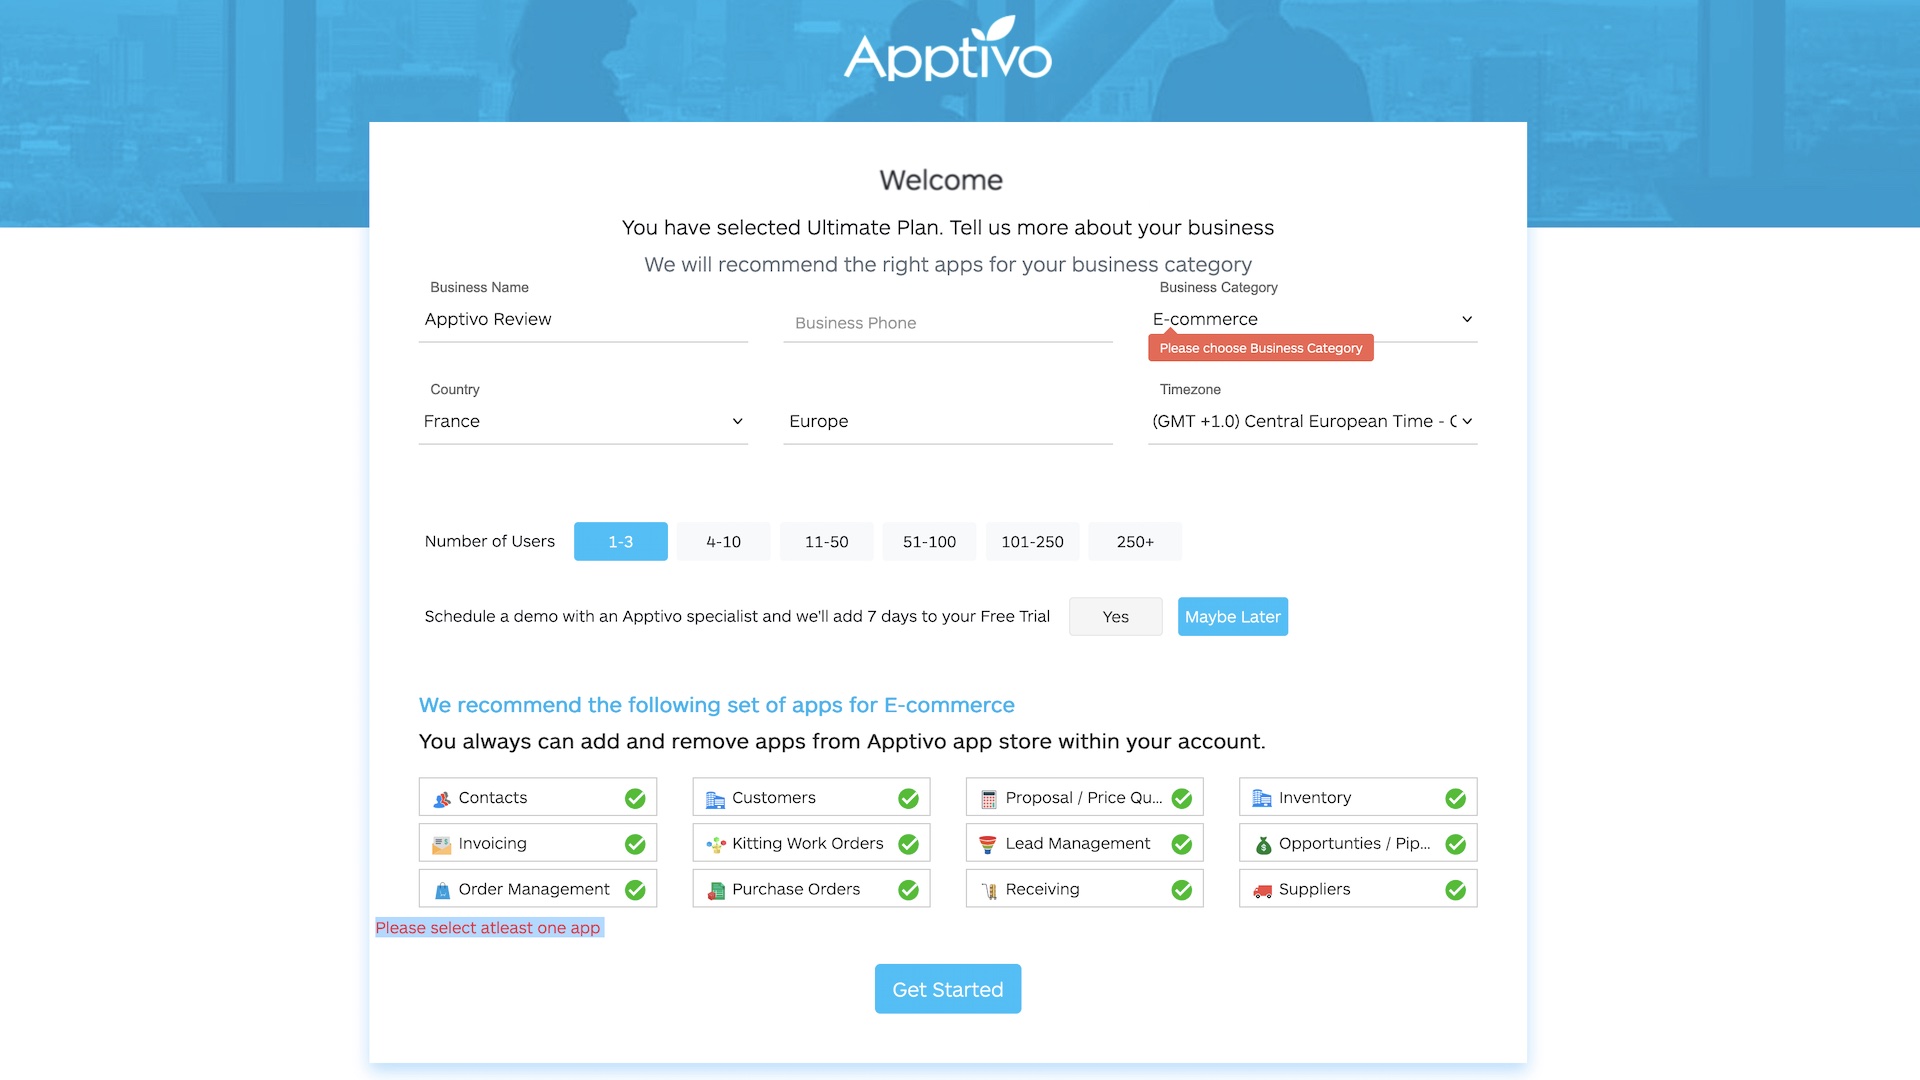 Apptivo's welcome page